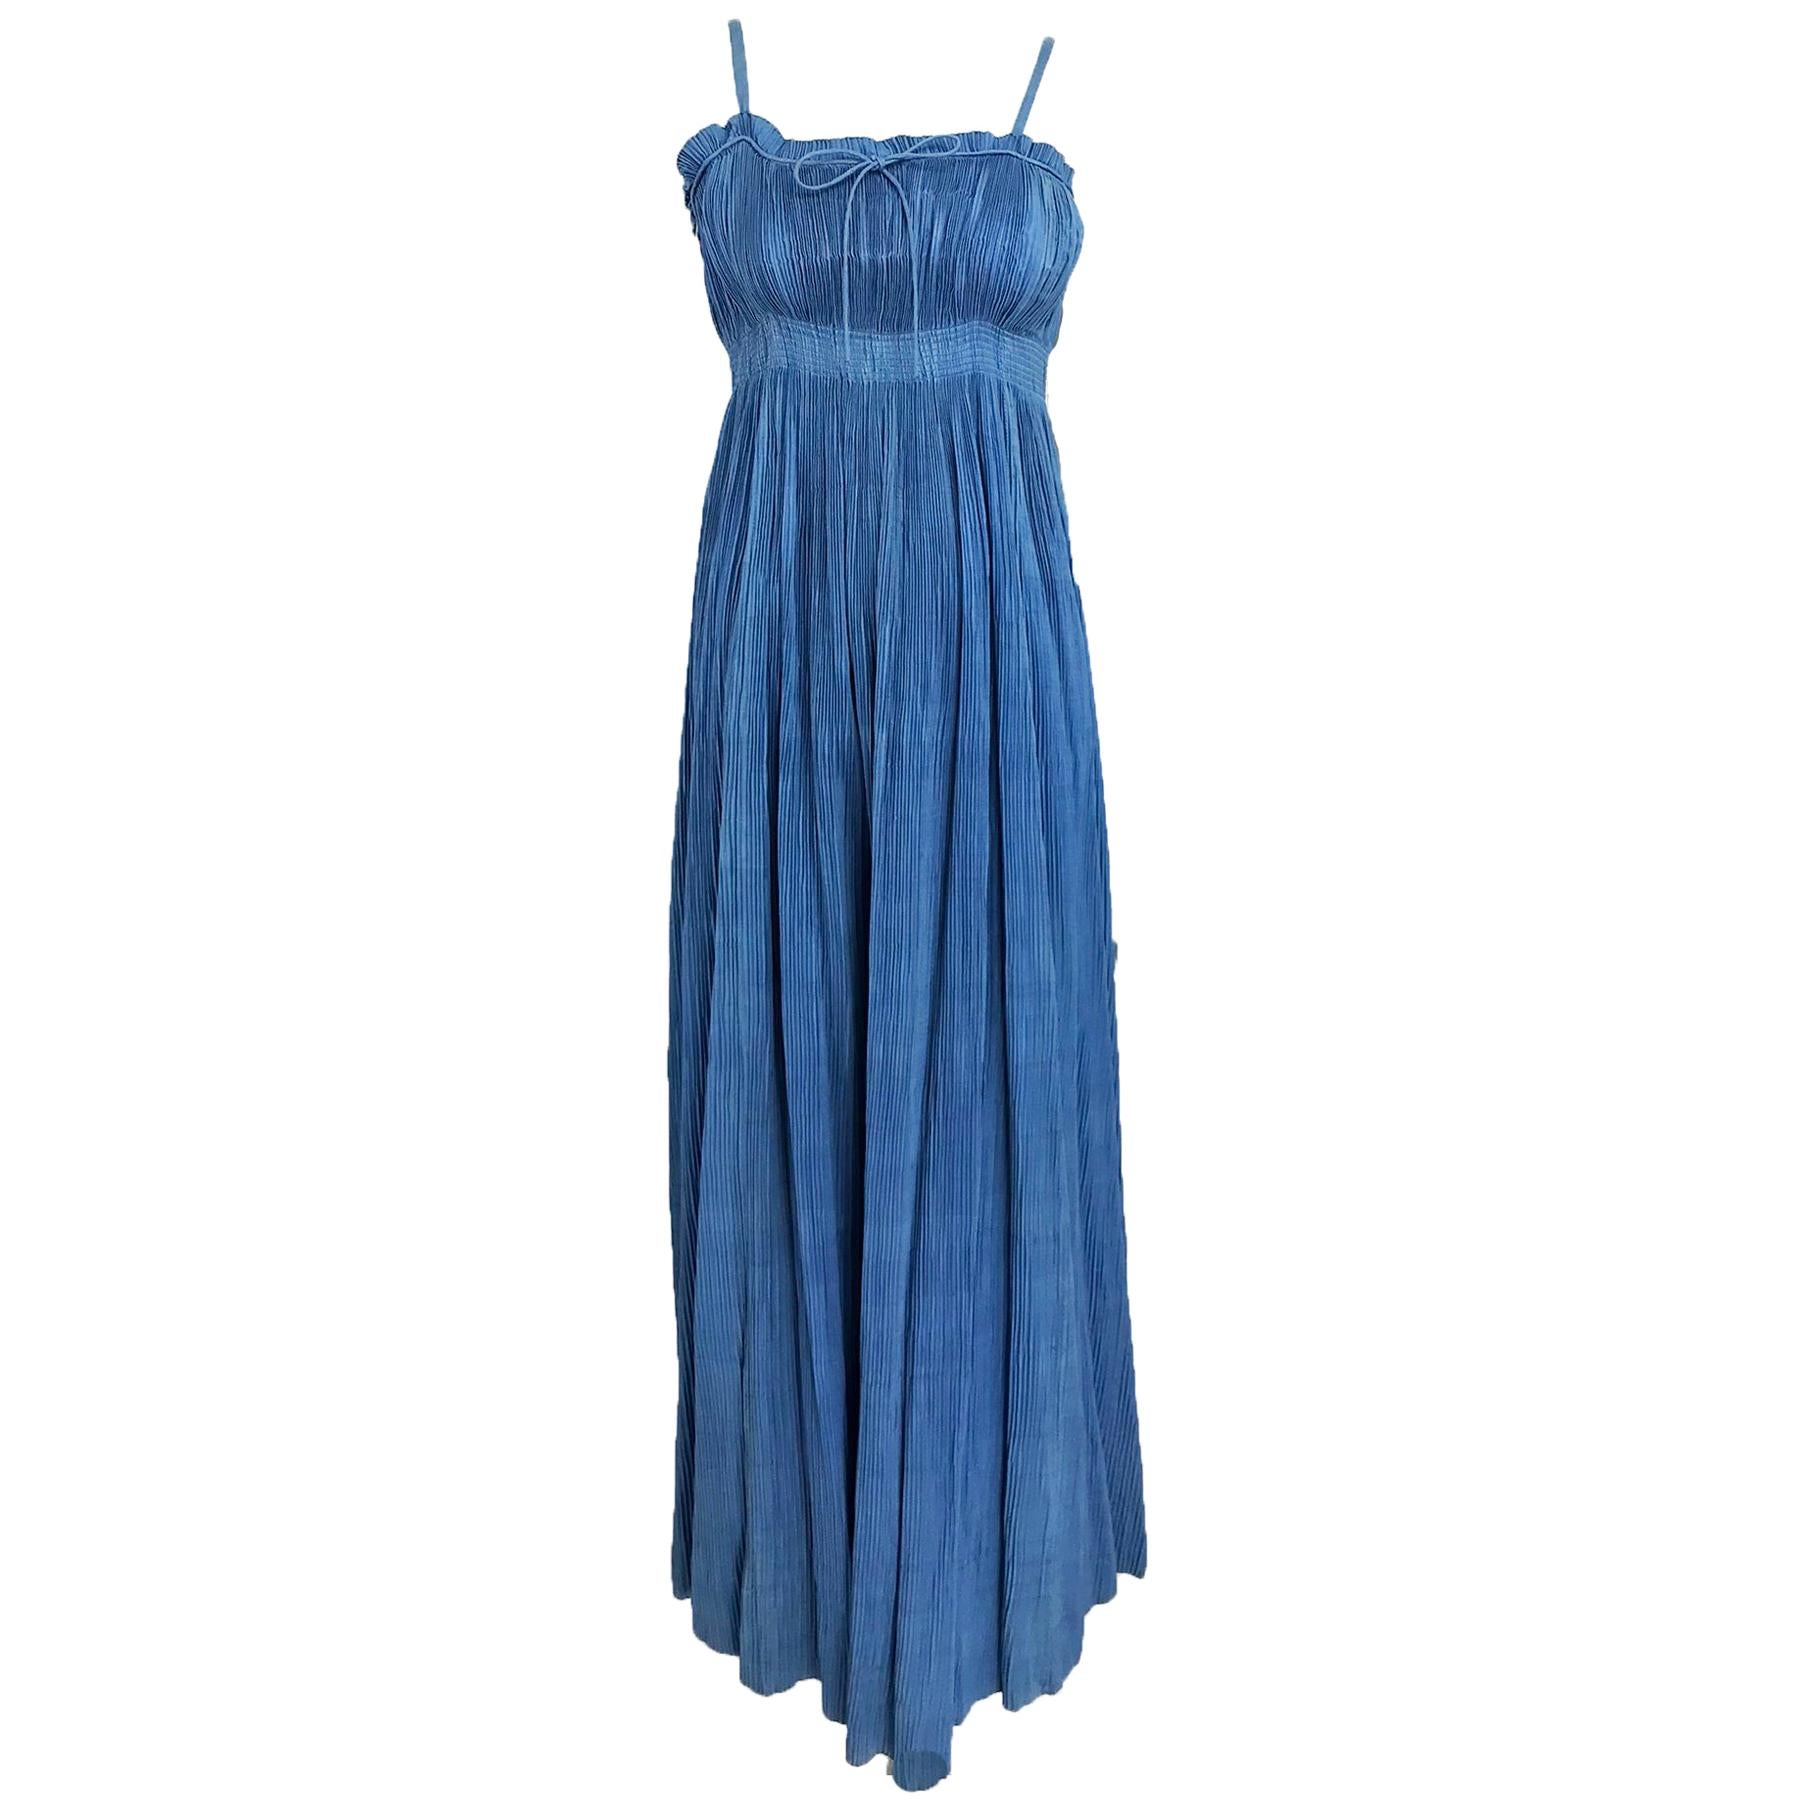 1930s Blue Pinch Pleated Raw Silk Couture Evening Gown Vintage